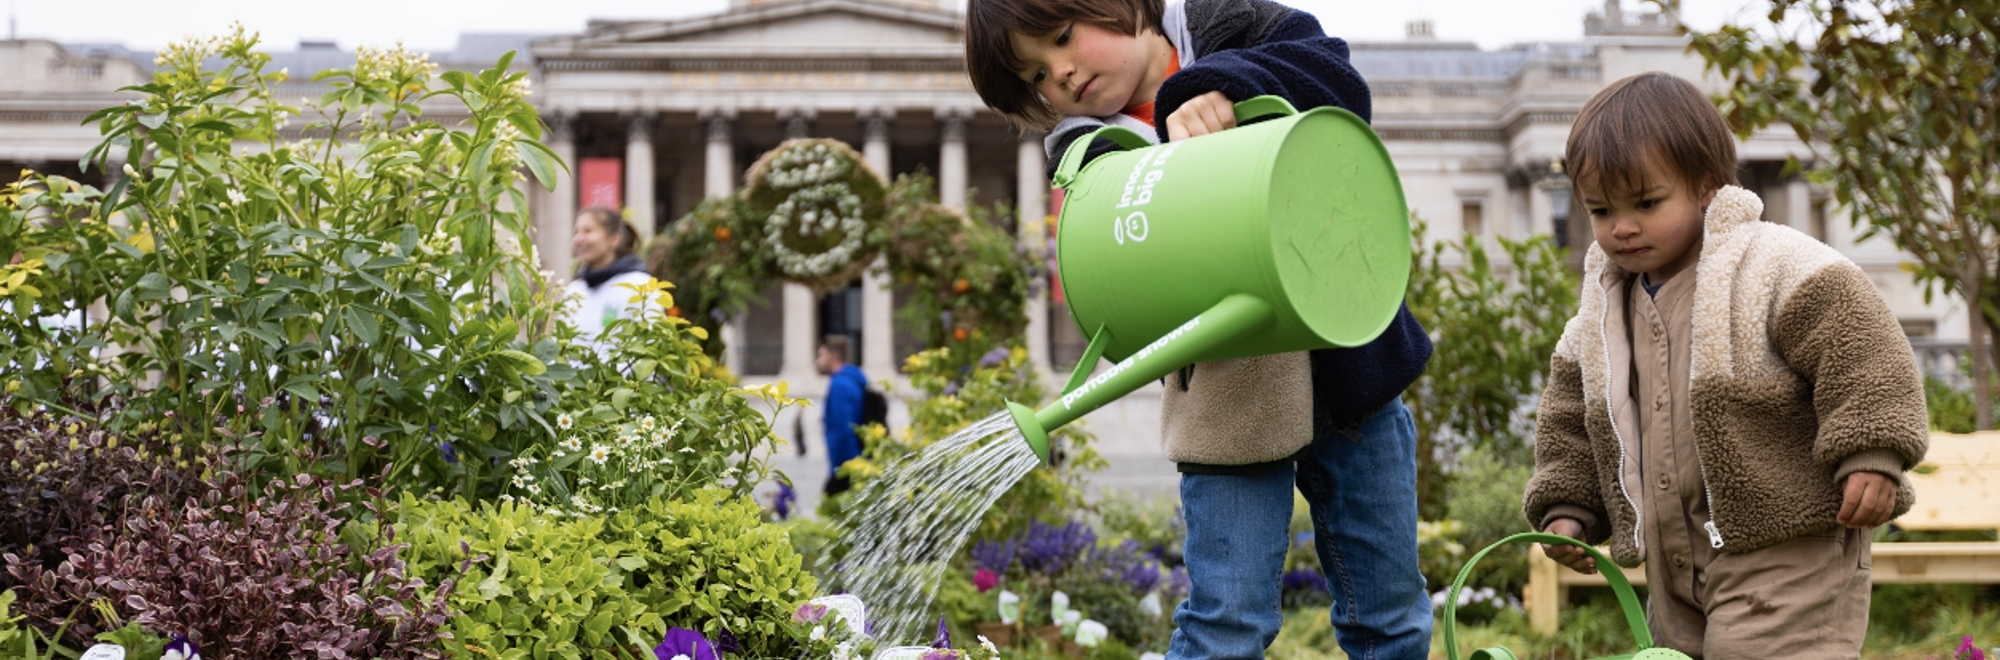 Innocent Drinks transforms Trafalgar Square into a wilderness to promote the benefits of biodiversity in urban spaces